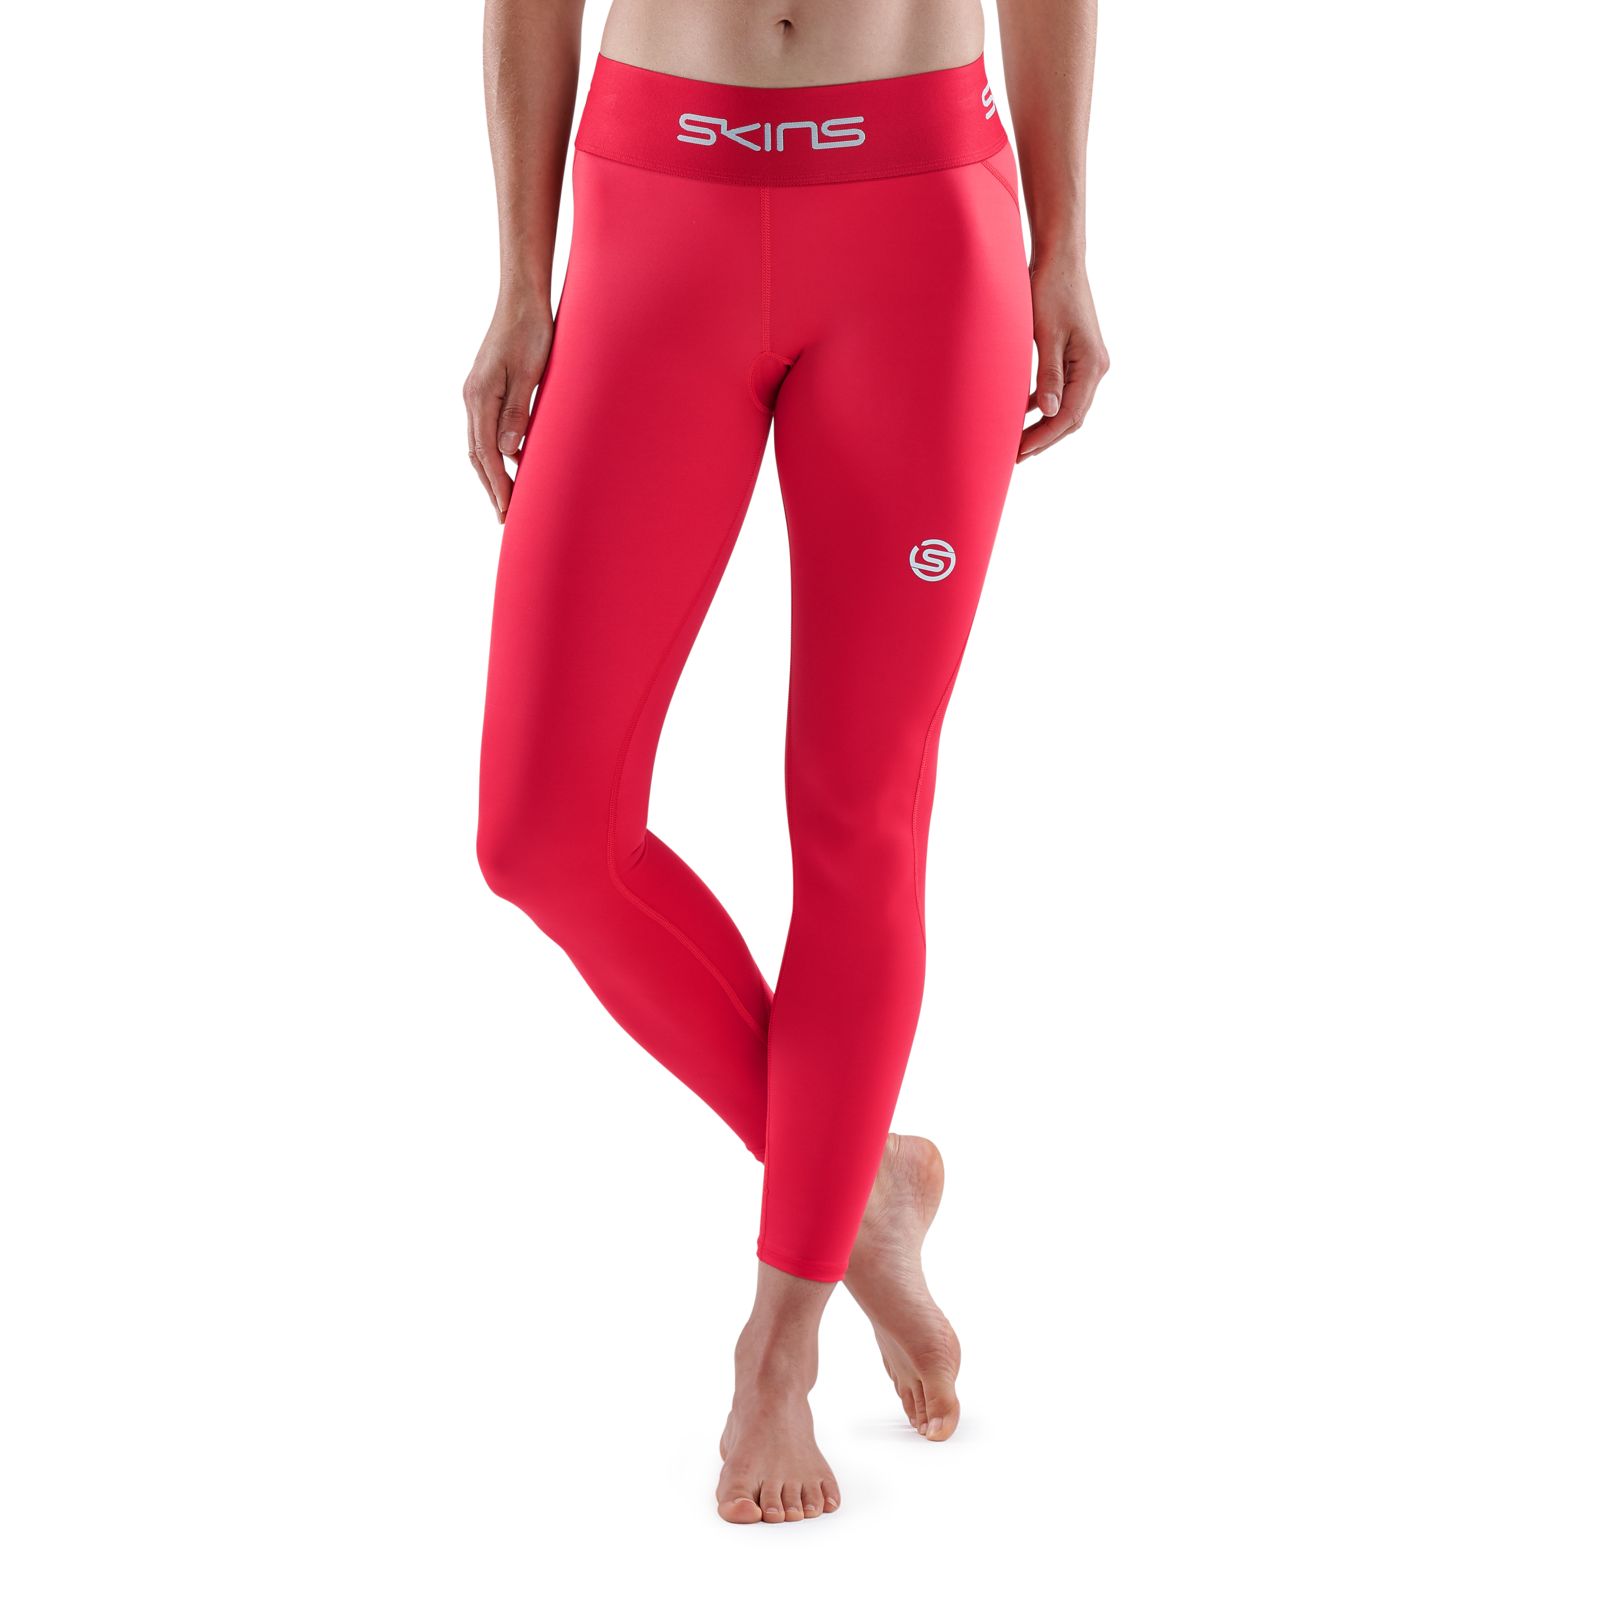 SKINS SERIES-1 WOMEN'S 7/8 TIGHTS RED - SKINS Compression USA